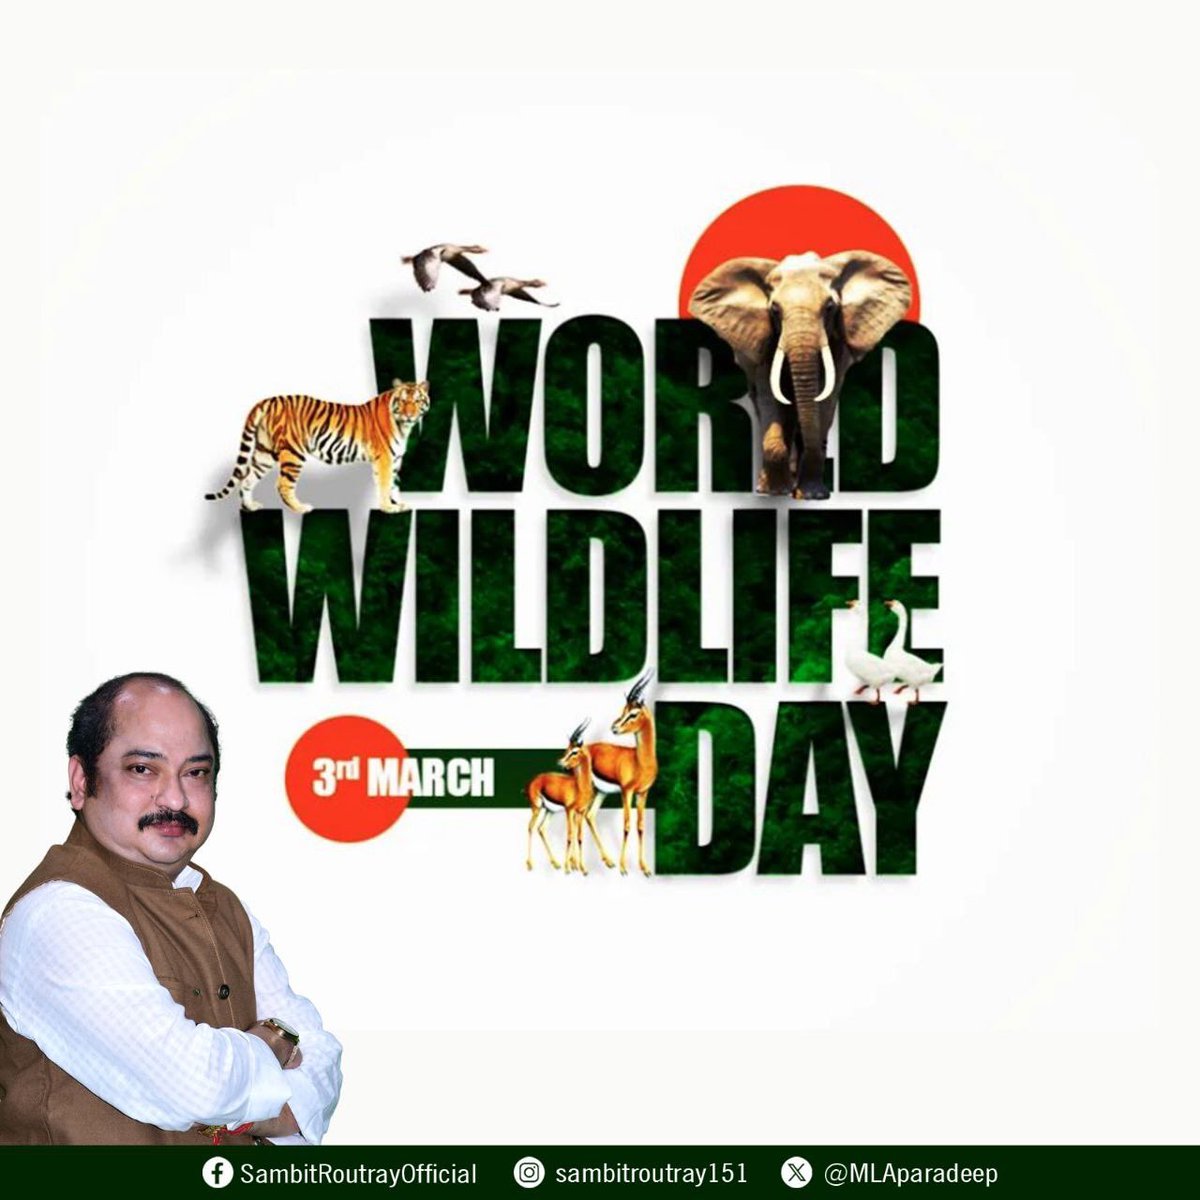 World Wildlife Day reminds us of the intricate web of life that sustains ecosystems worldwide, highlighting how each species, big or small, plays a crucial role in maintaining biodiversity. #WorldWildlifeday #TogetherForNature #HealTheWorld #NaturePreservation